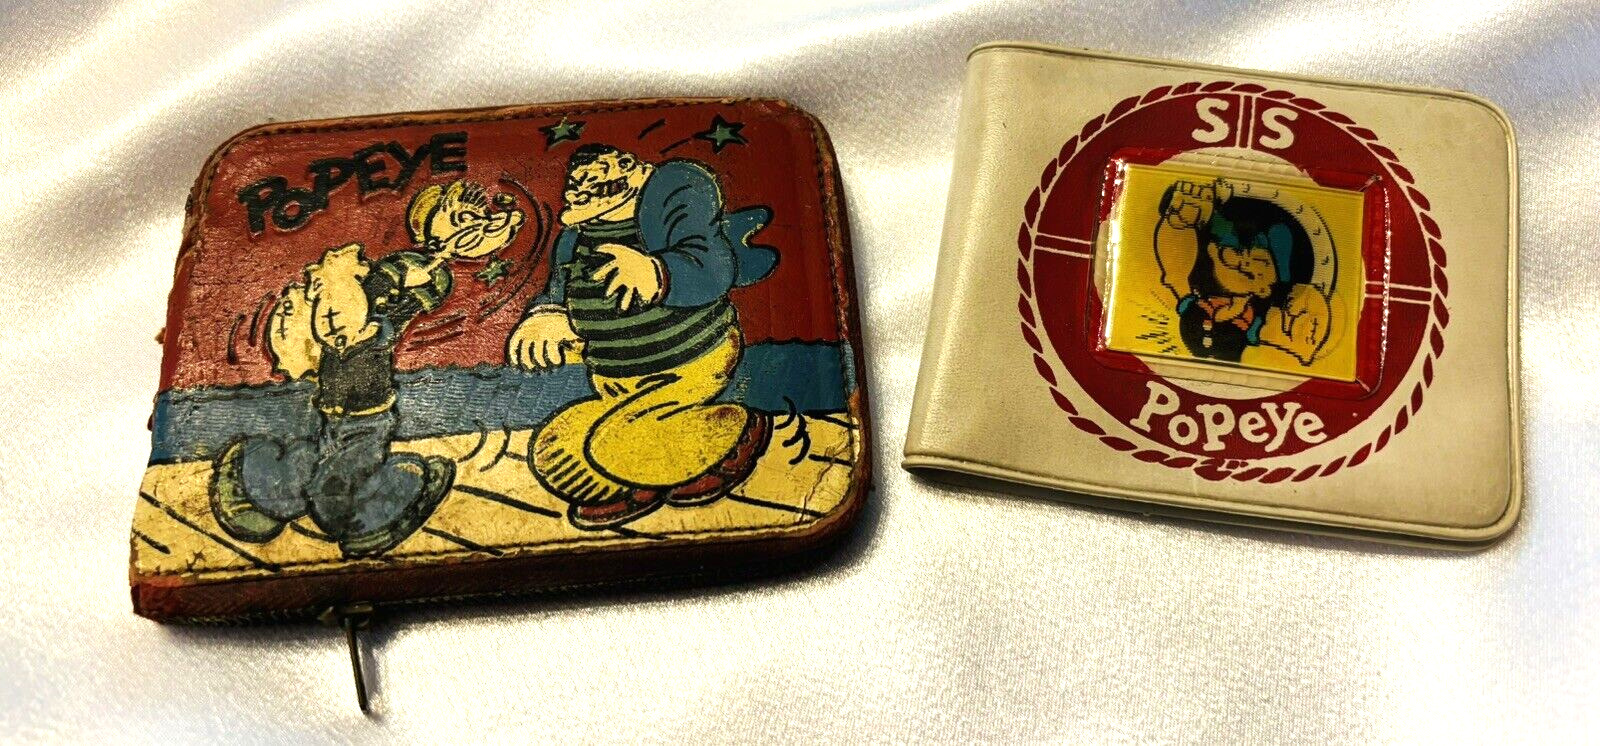 Lot of 2 Vintage Popeye The Sailorman King Features S.S. Popeye Leather Wallets